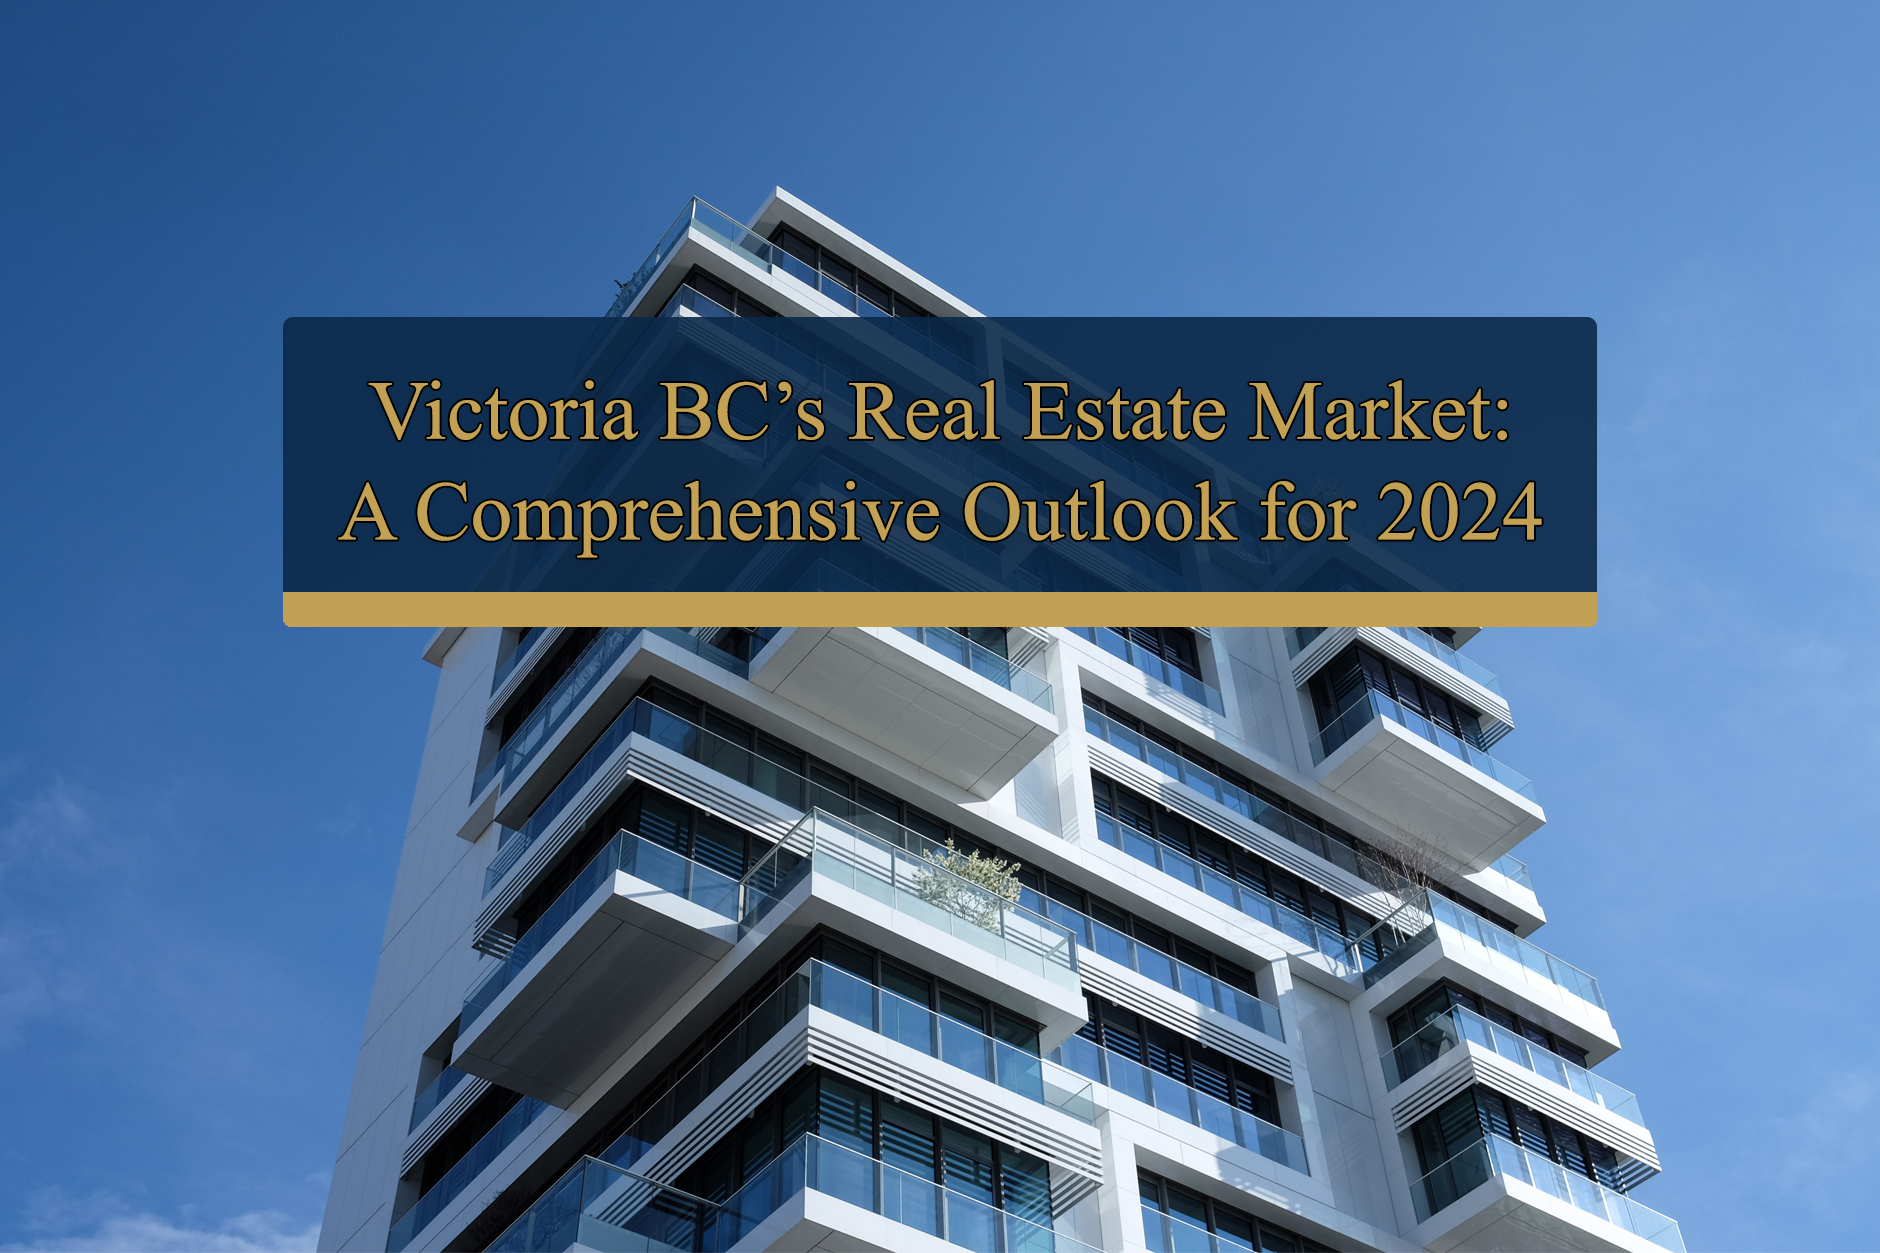 Victoria BC's Real Estate Market: A comprehensive outlook for 2024